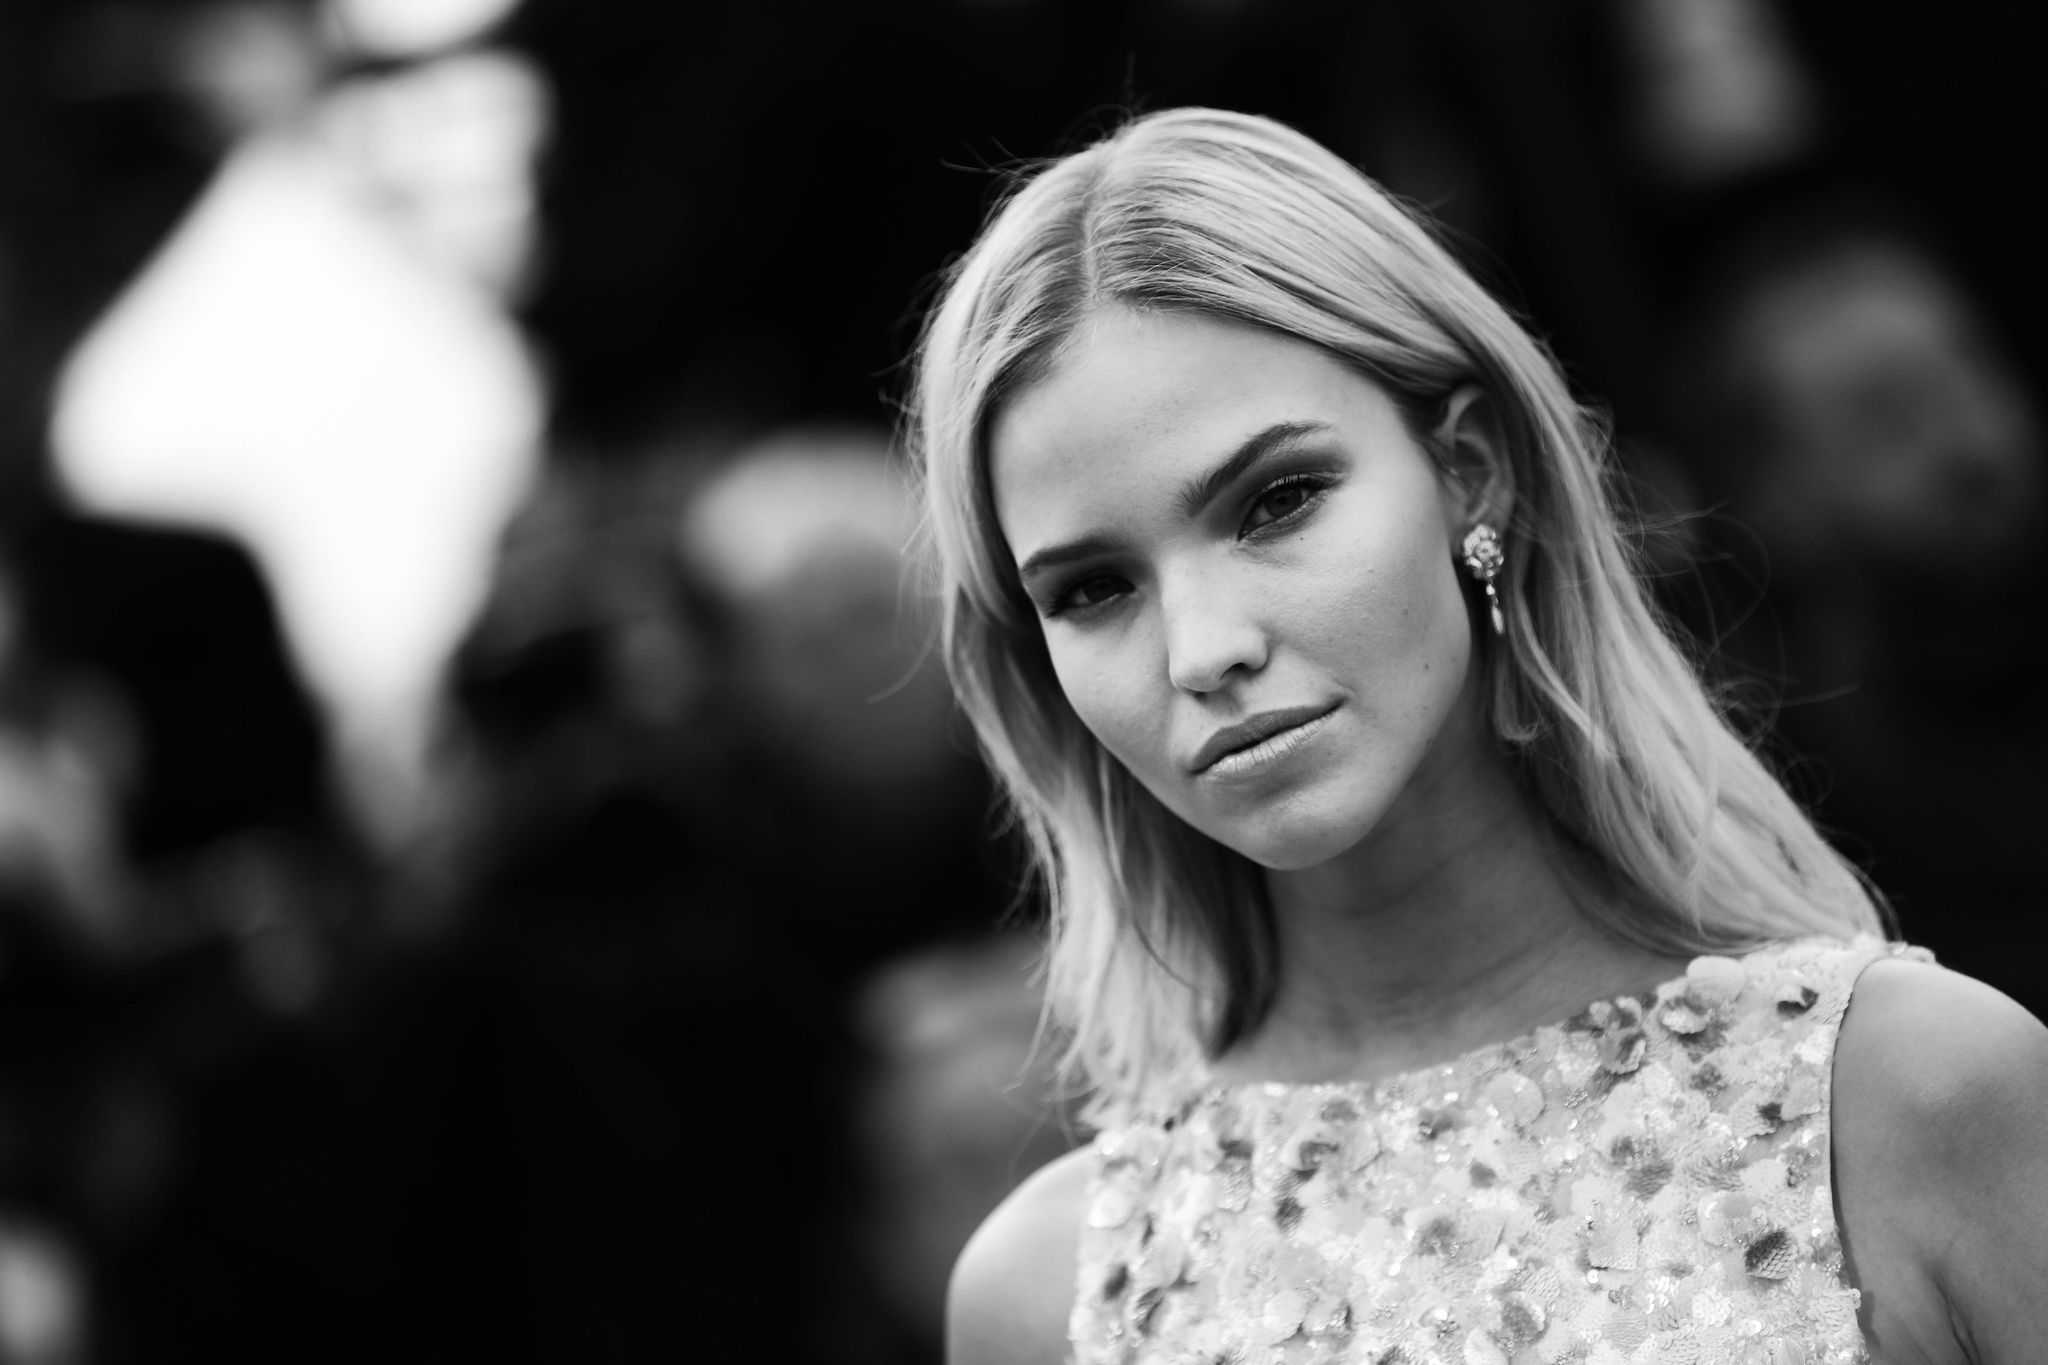 cannes, france   may 21 editor's note this image has been digitally altered sasha luss attends the screening of "once upon a time in hollywood" during the 72nd annual cannes film festival on may 21, 2019 in cannes, france photo by vittorio zunino celottogetty images